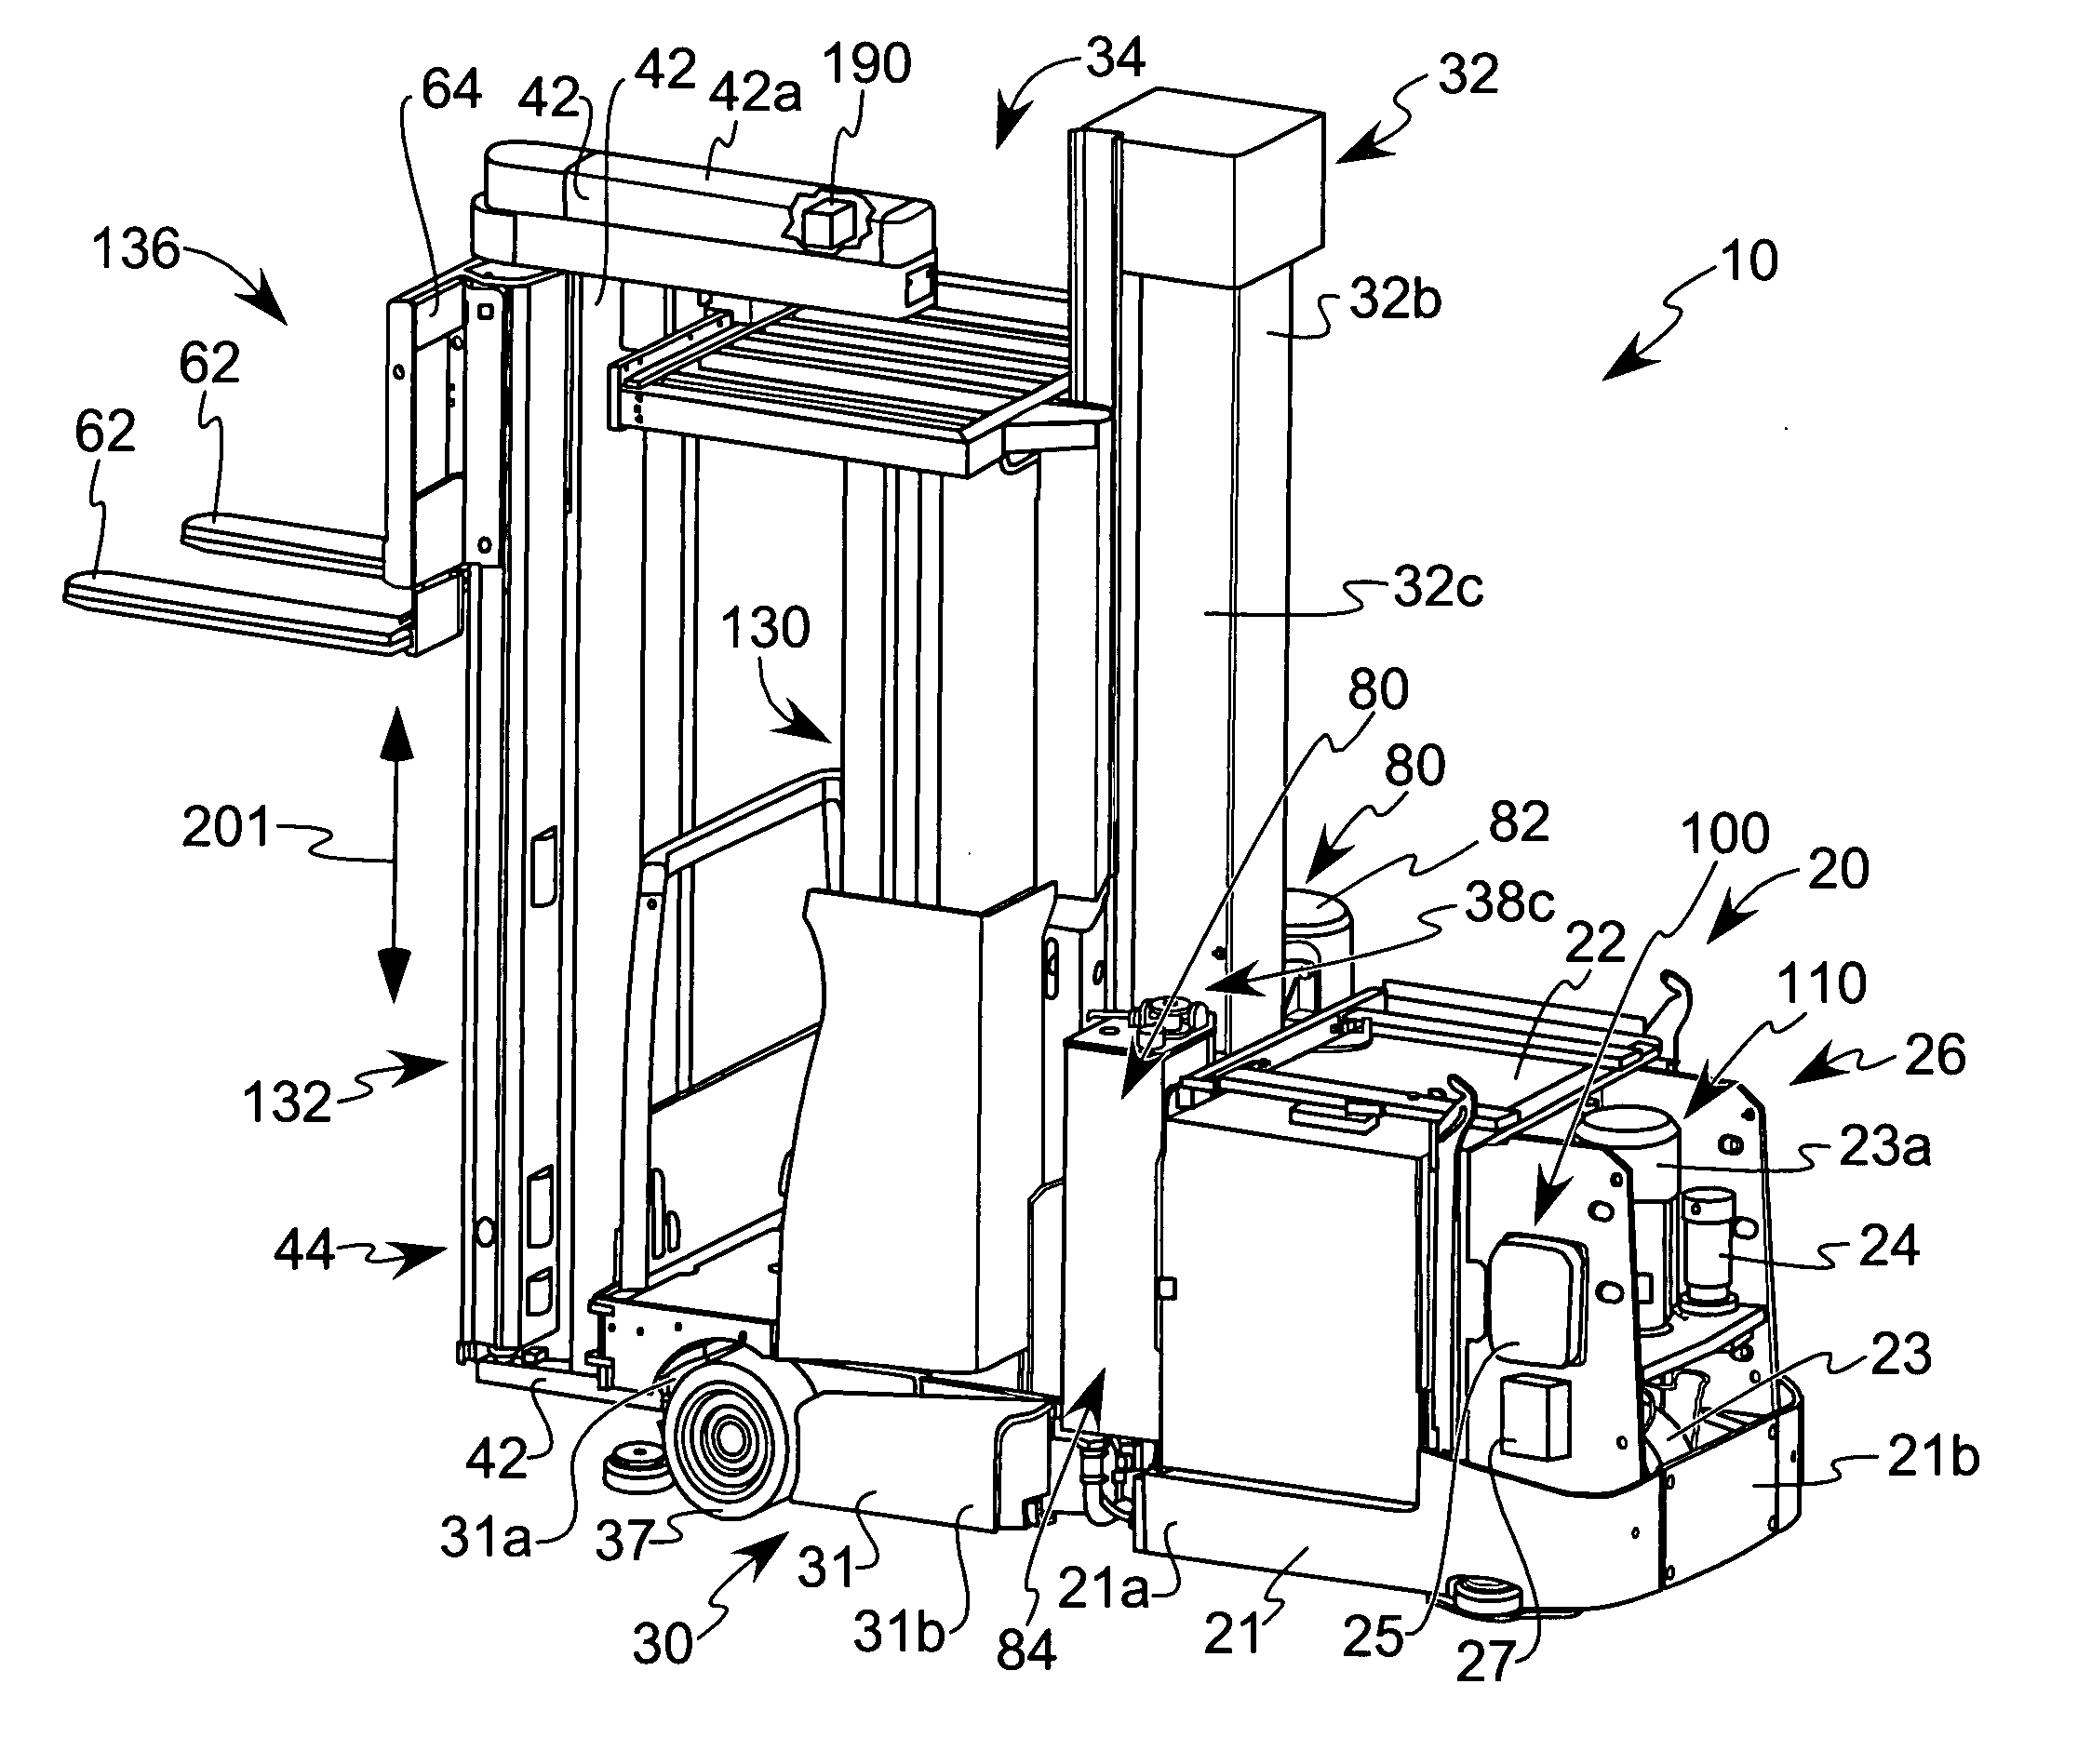 Materials handling vehicle having substantially all hydraulic components mounted on a main frame assembly